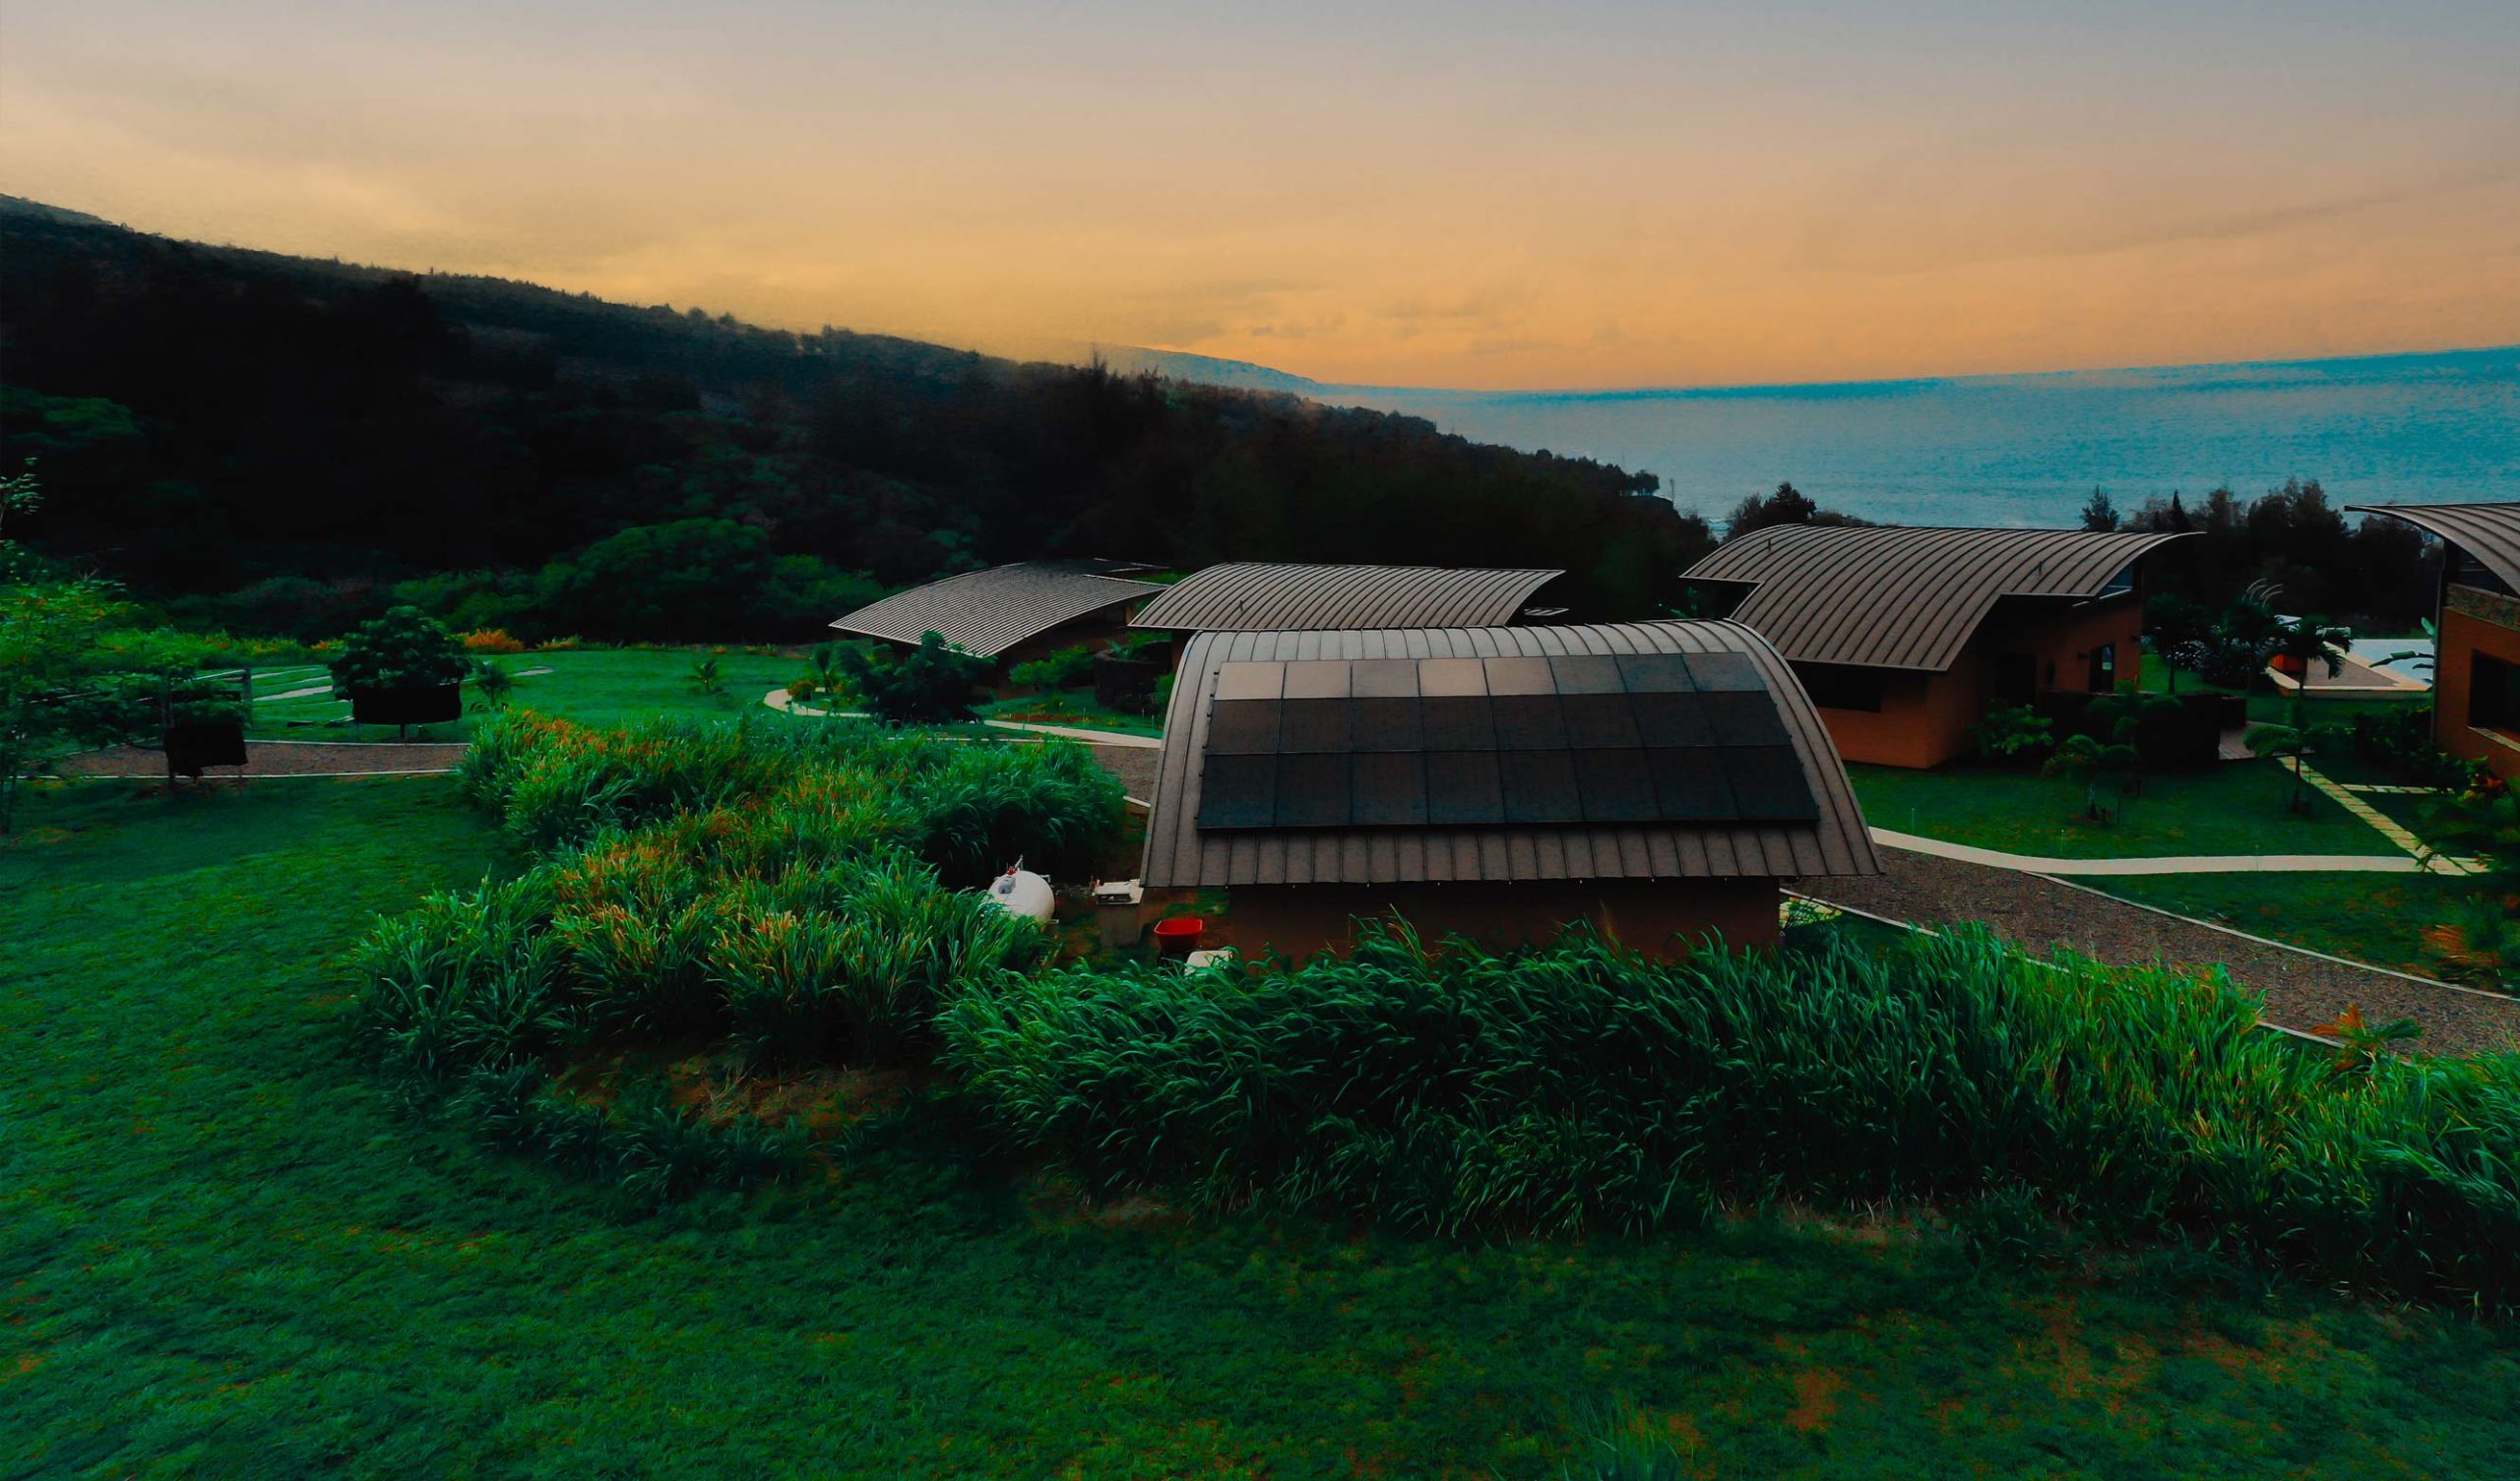 An aerial view of a multi-family home with solar panels on the roof and a view of the ocean.